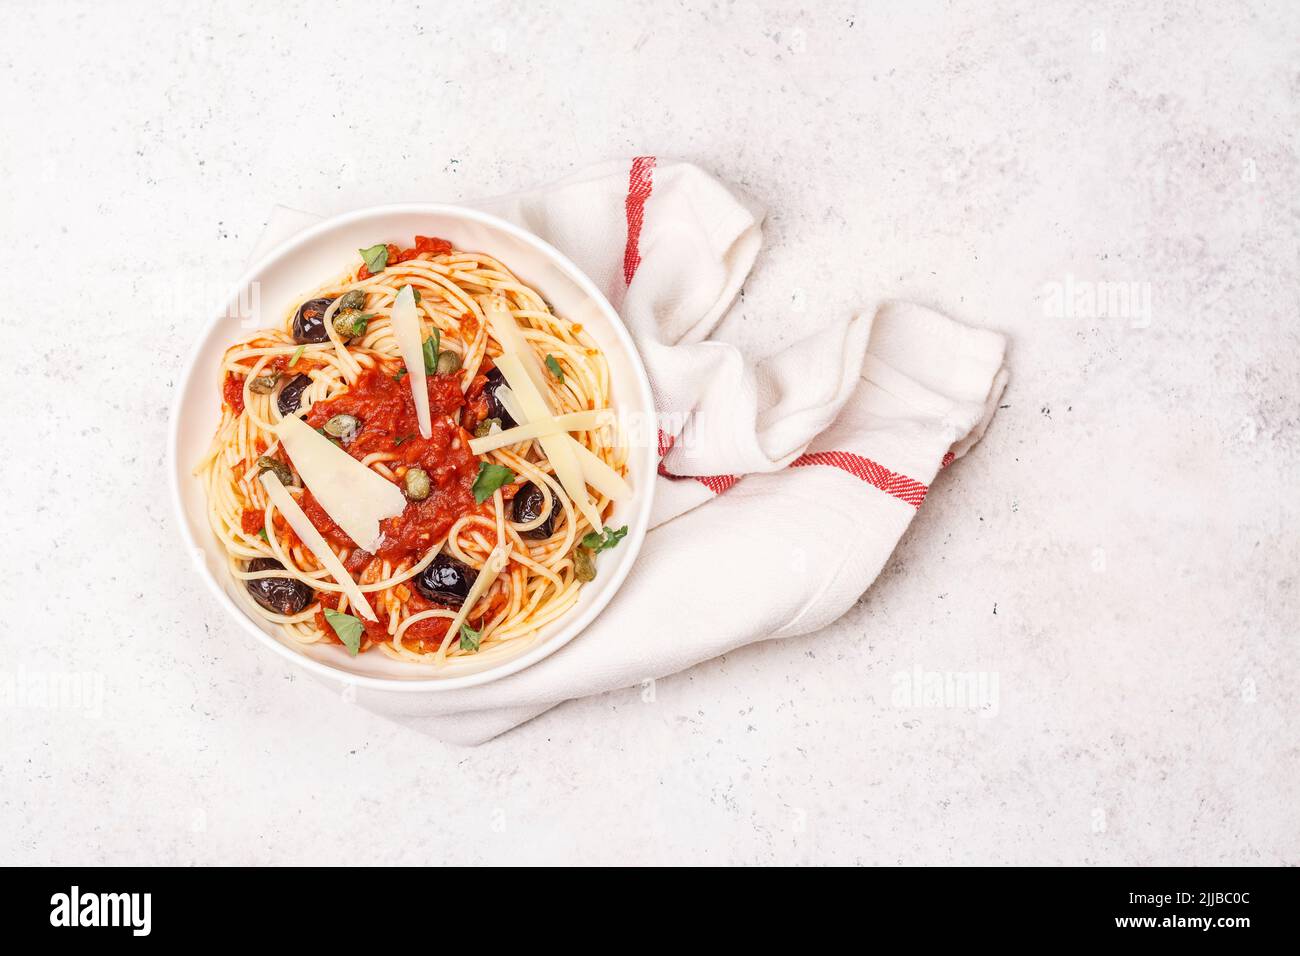 Spaghetti alla puttanesca . Italian pasta with tomatoes, olives, capers, anchovies and parsley. Italian food. Copy space. Top view Stock Photo